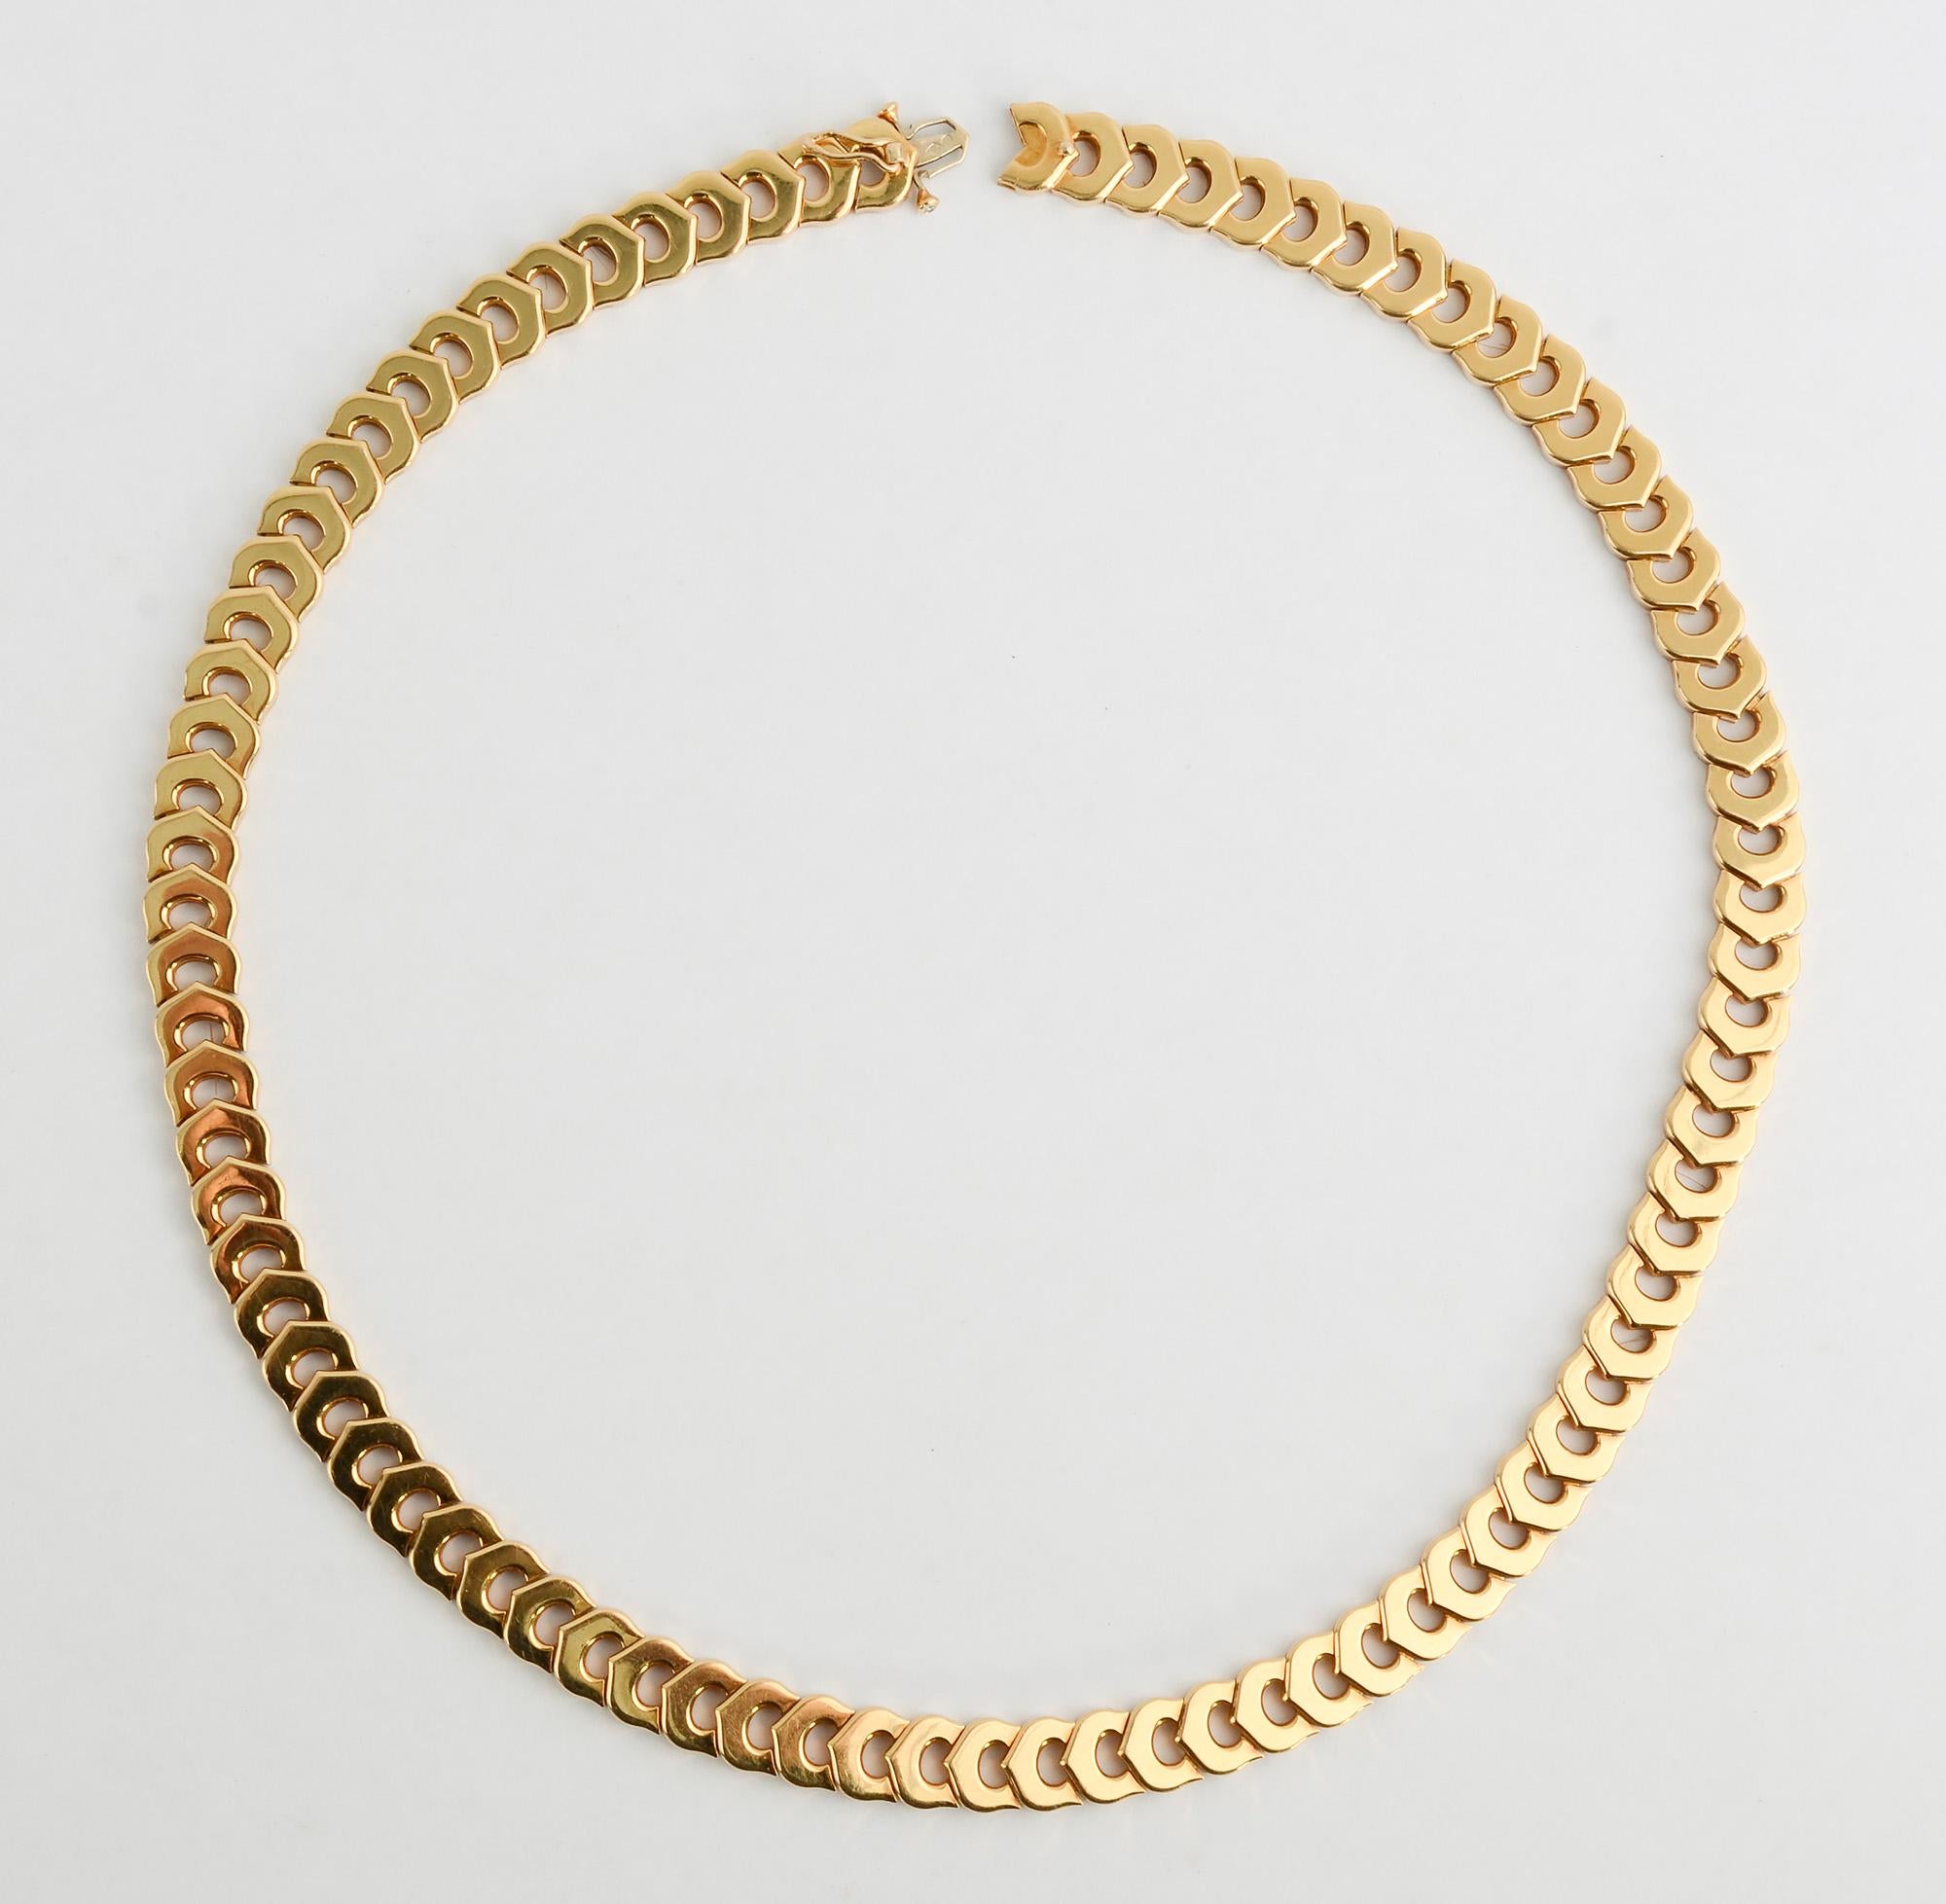 Elegant and understated C de Cartier 18 karat gold choker necklace by Cartier. For those in the know, the interlocking Cartier C's are evident but they can also look like interesting shaped  links unrelated to the logo.
The necklace measures 17 1/8